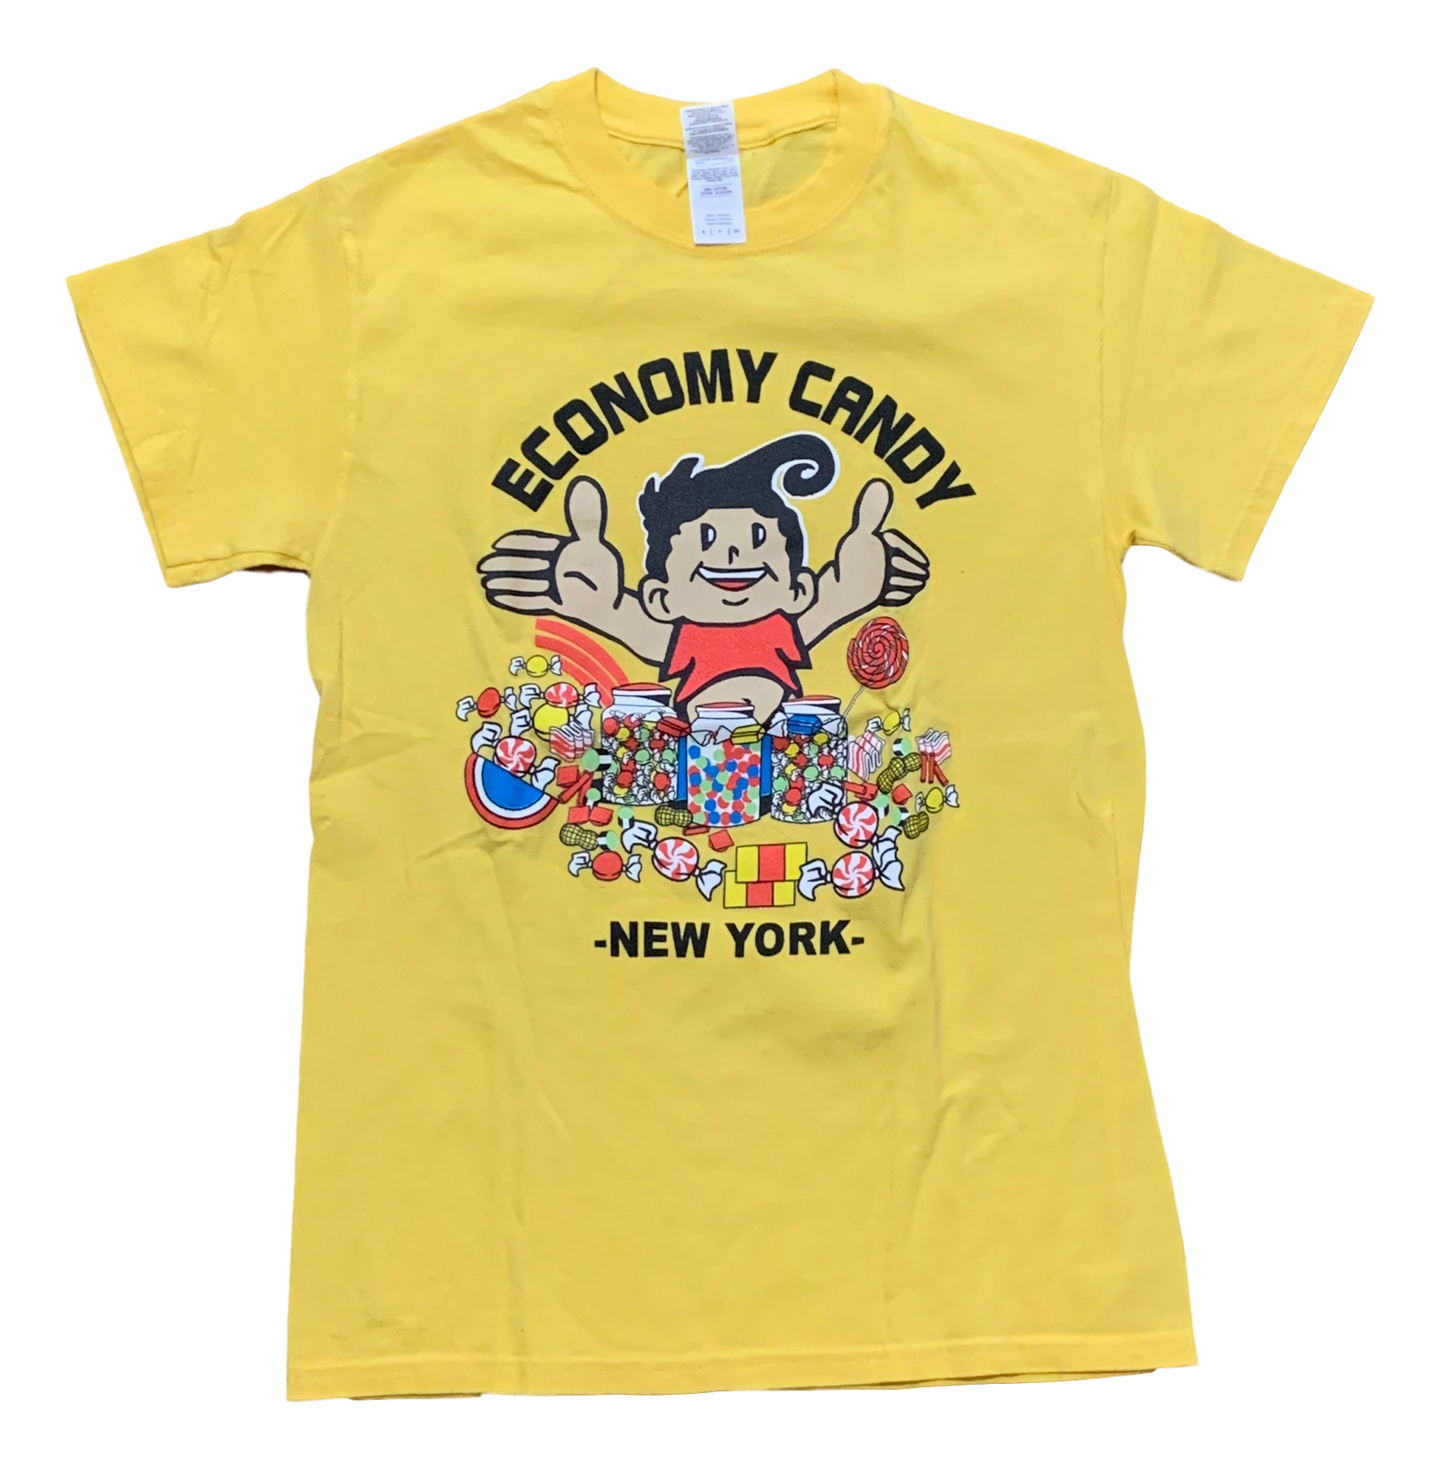 Vintage Economy Candy NYC Tee - Small